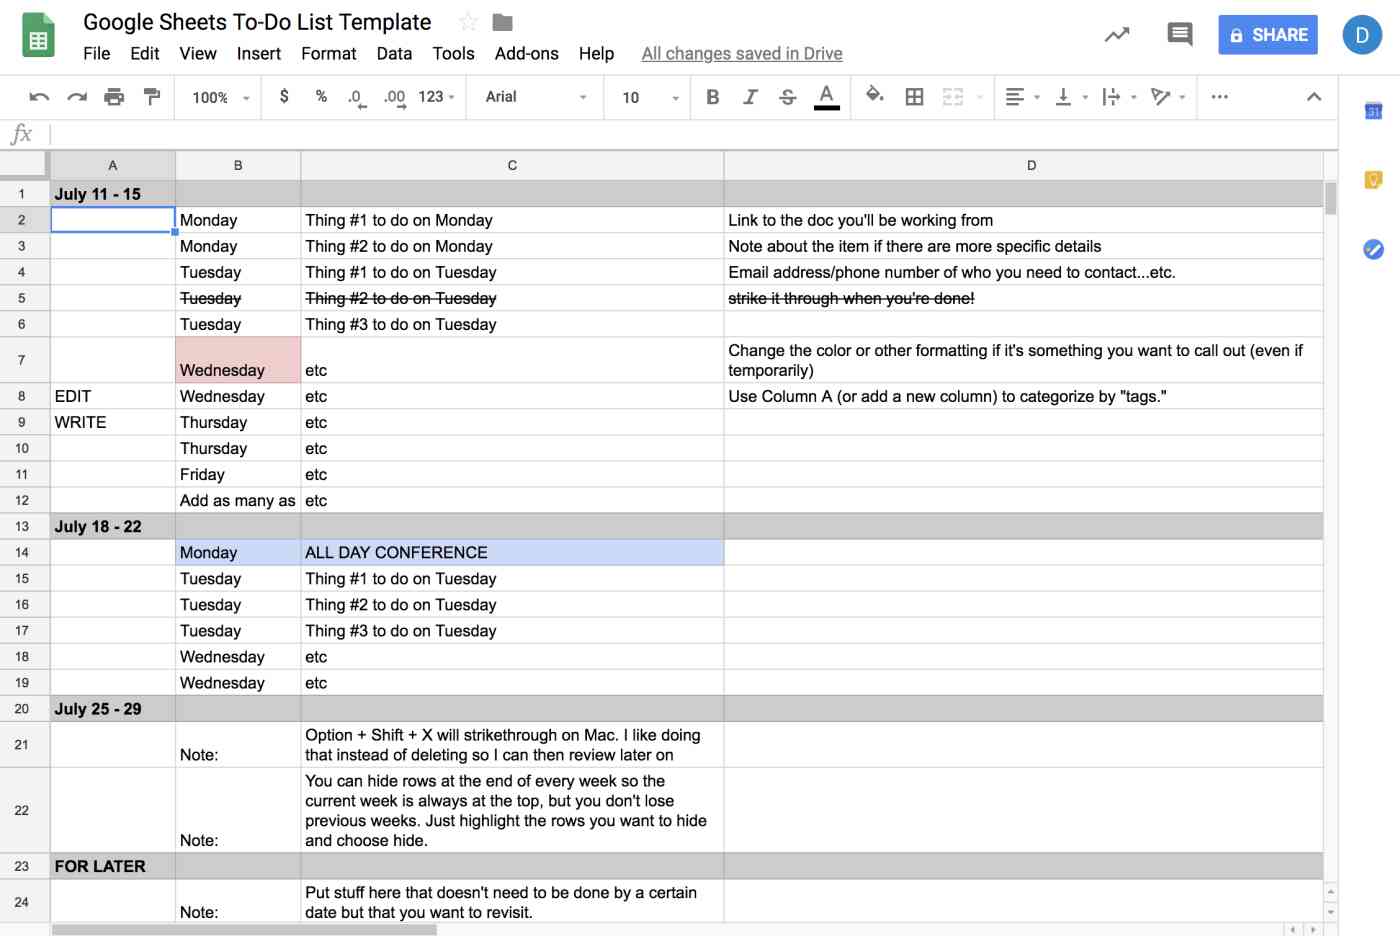 Deb's Google sheet's to do list system